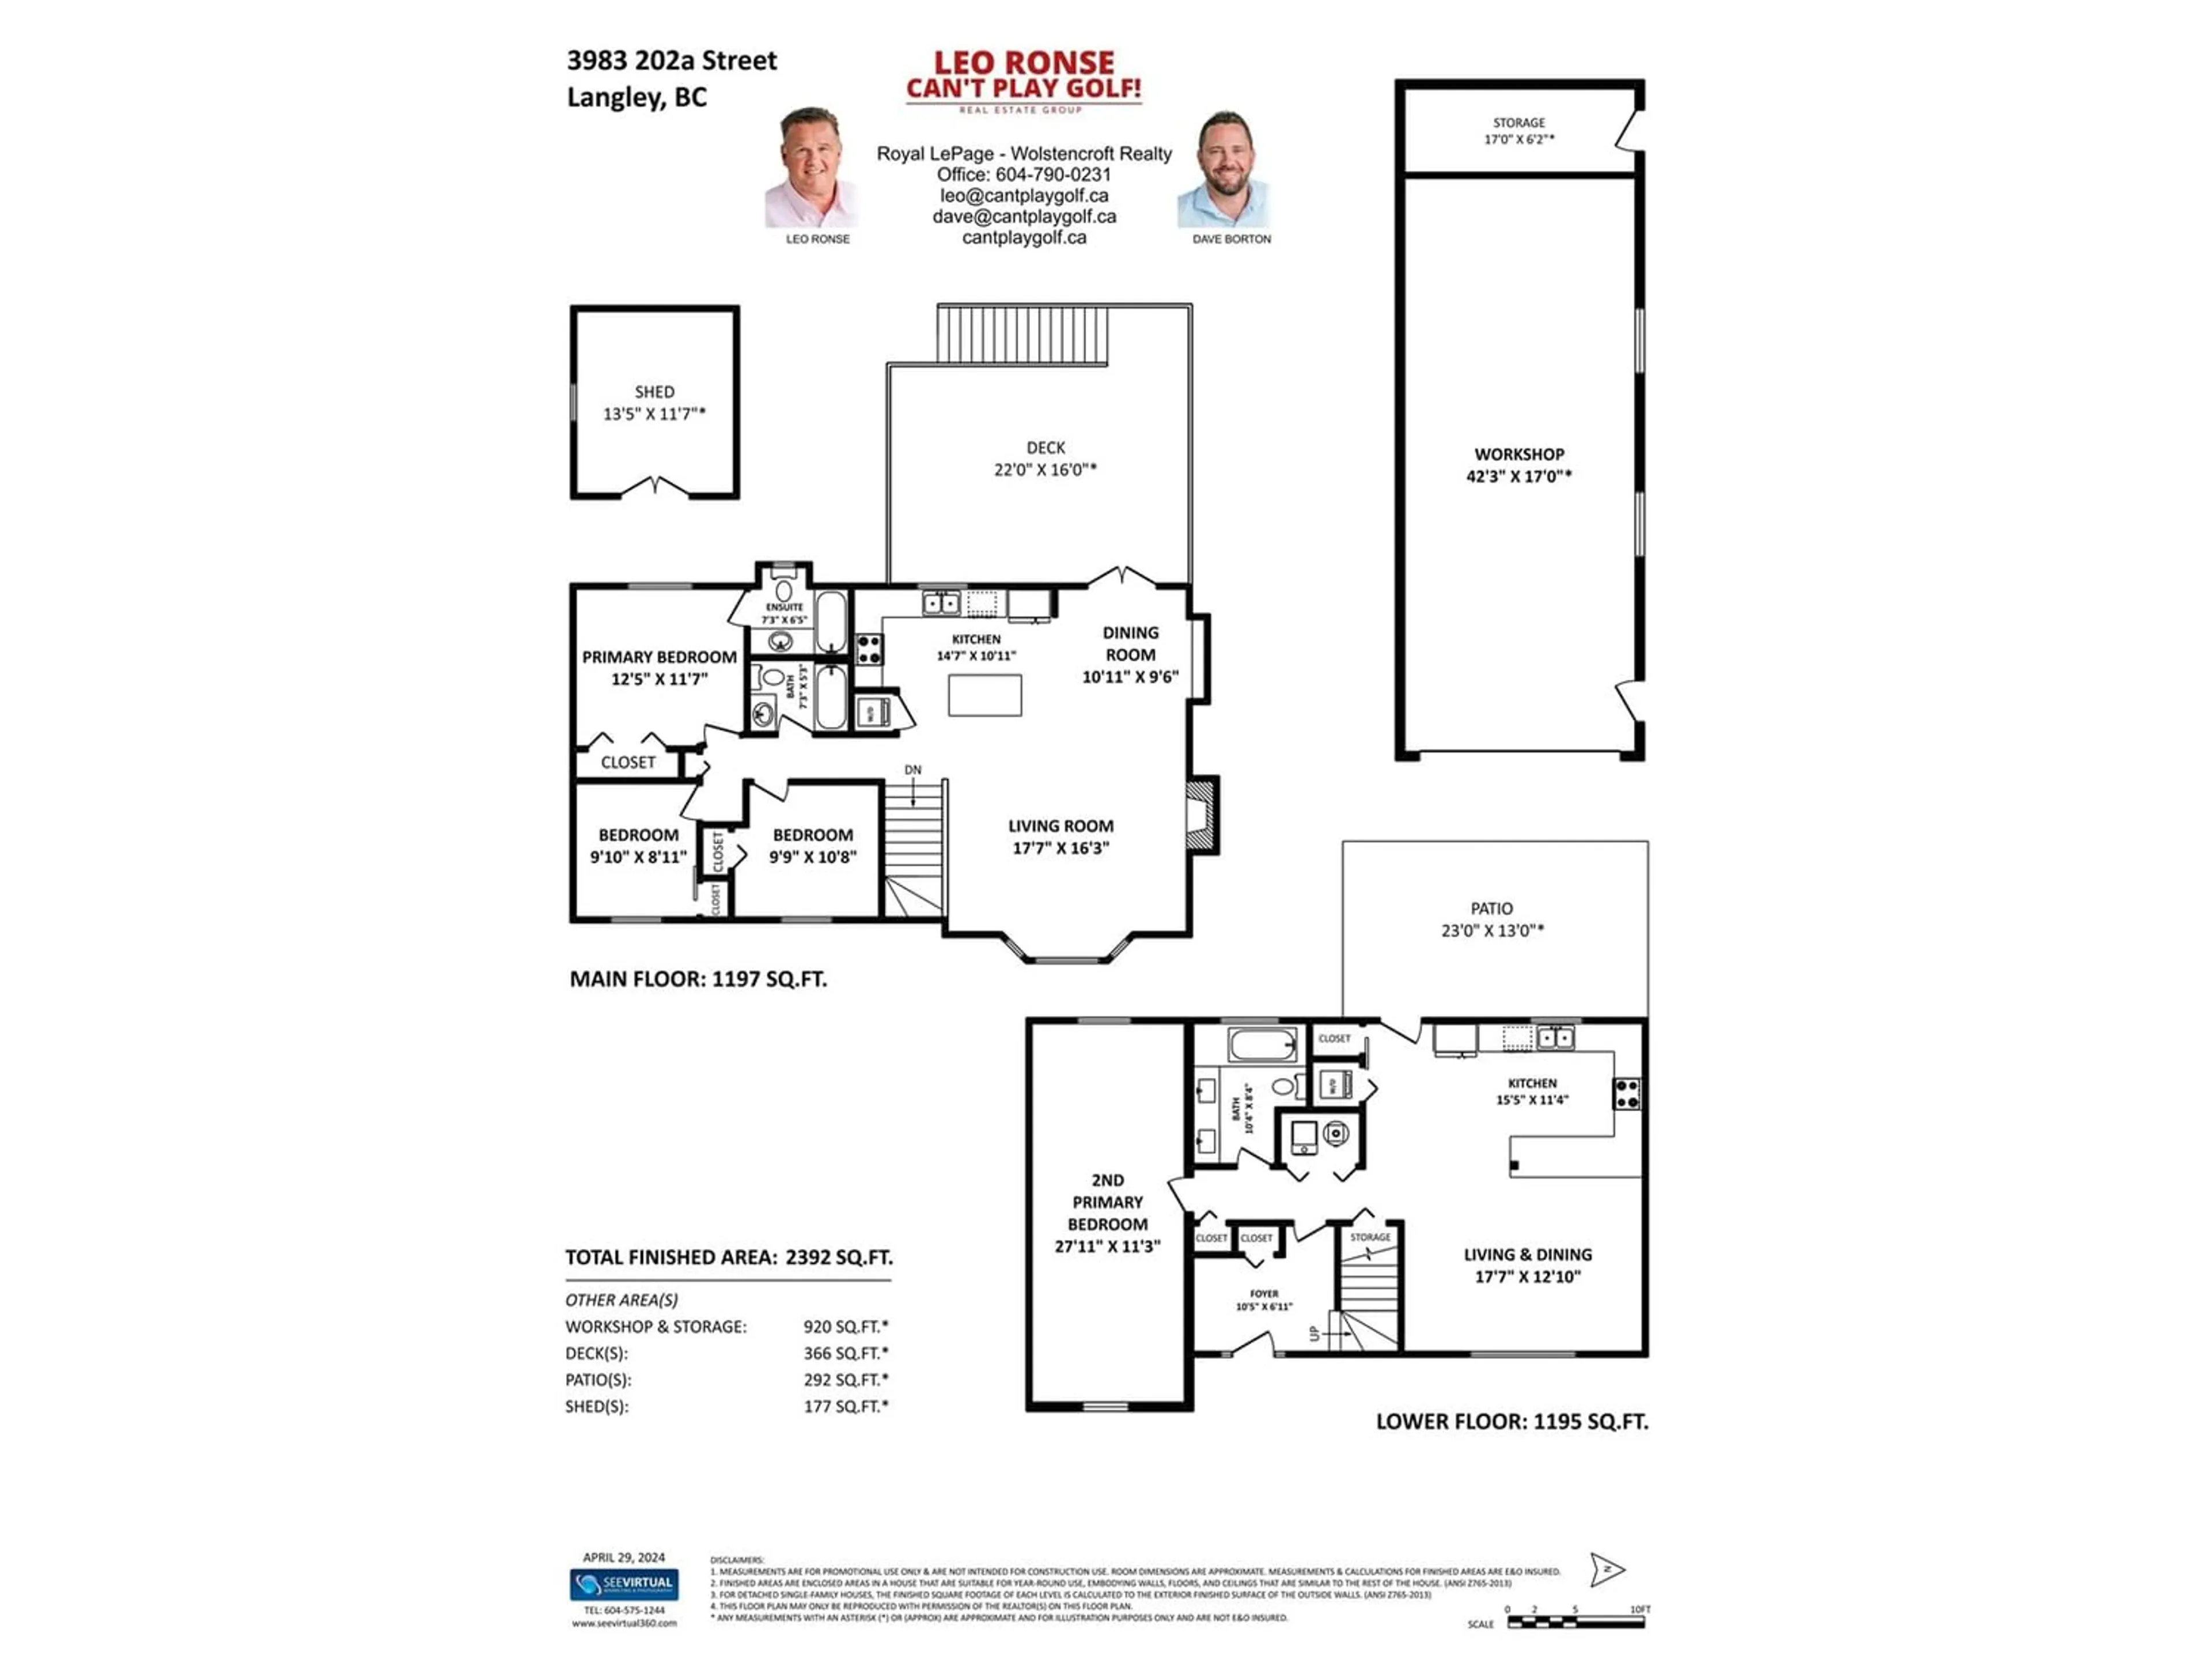 Floor plan for 3983 202A STREET, Langley British Columbia V3A1T3